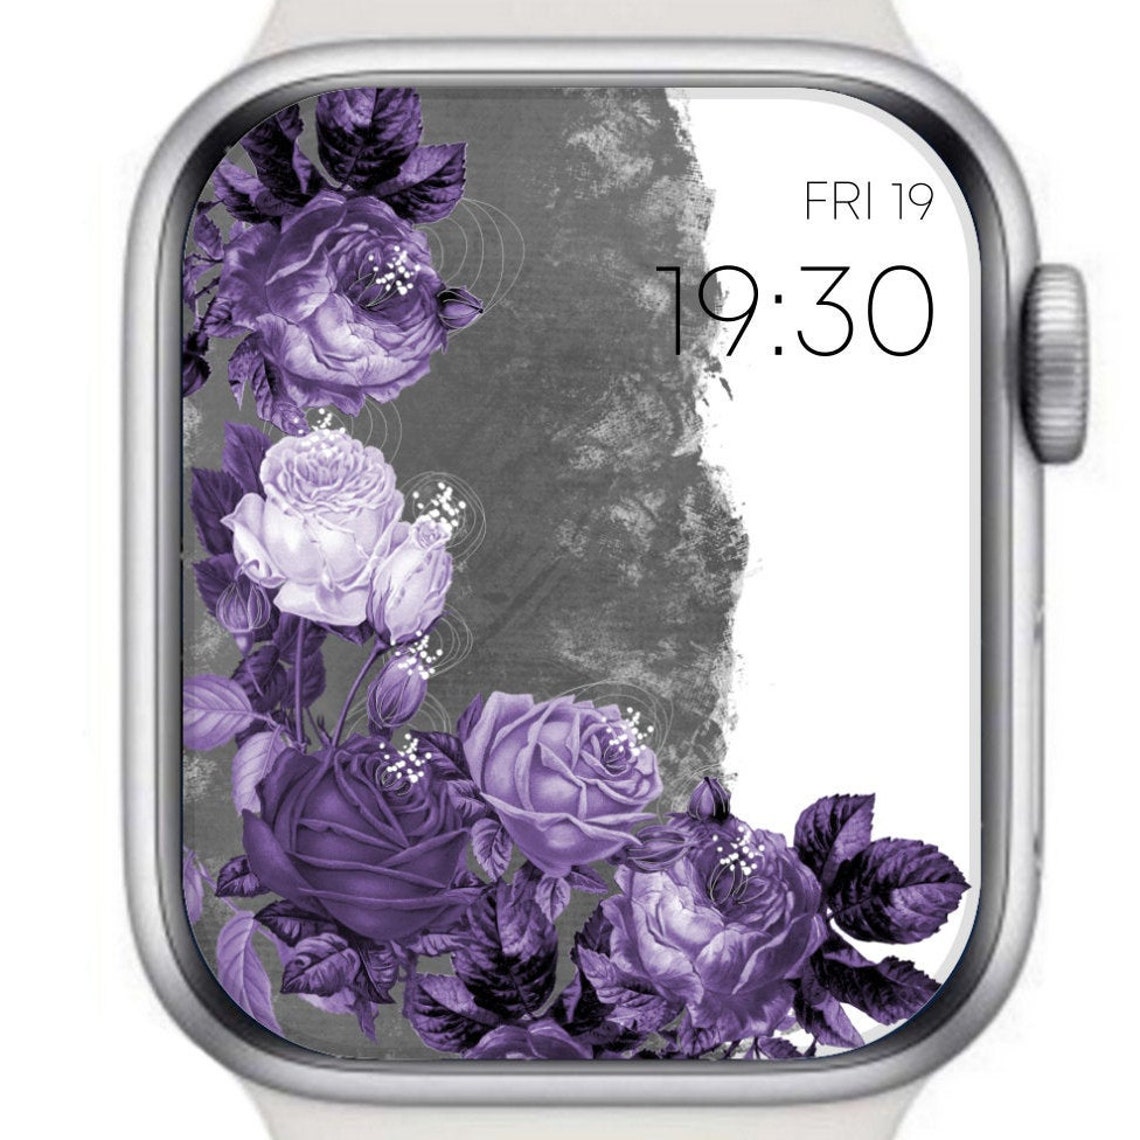 Floral Apple watch Applewatch wallpaper Apple Watch face | Etsy